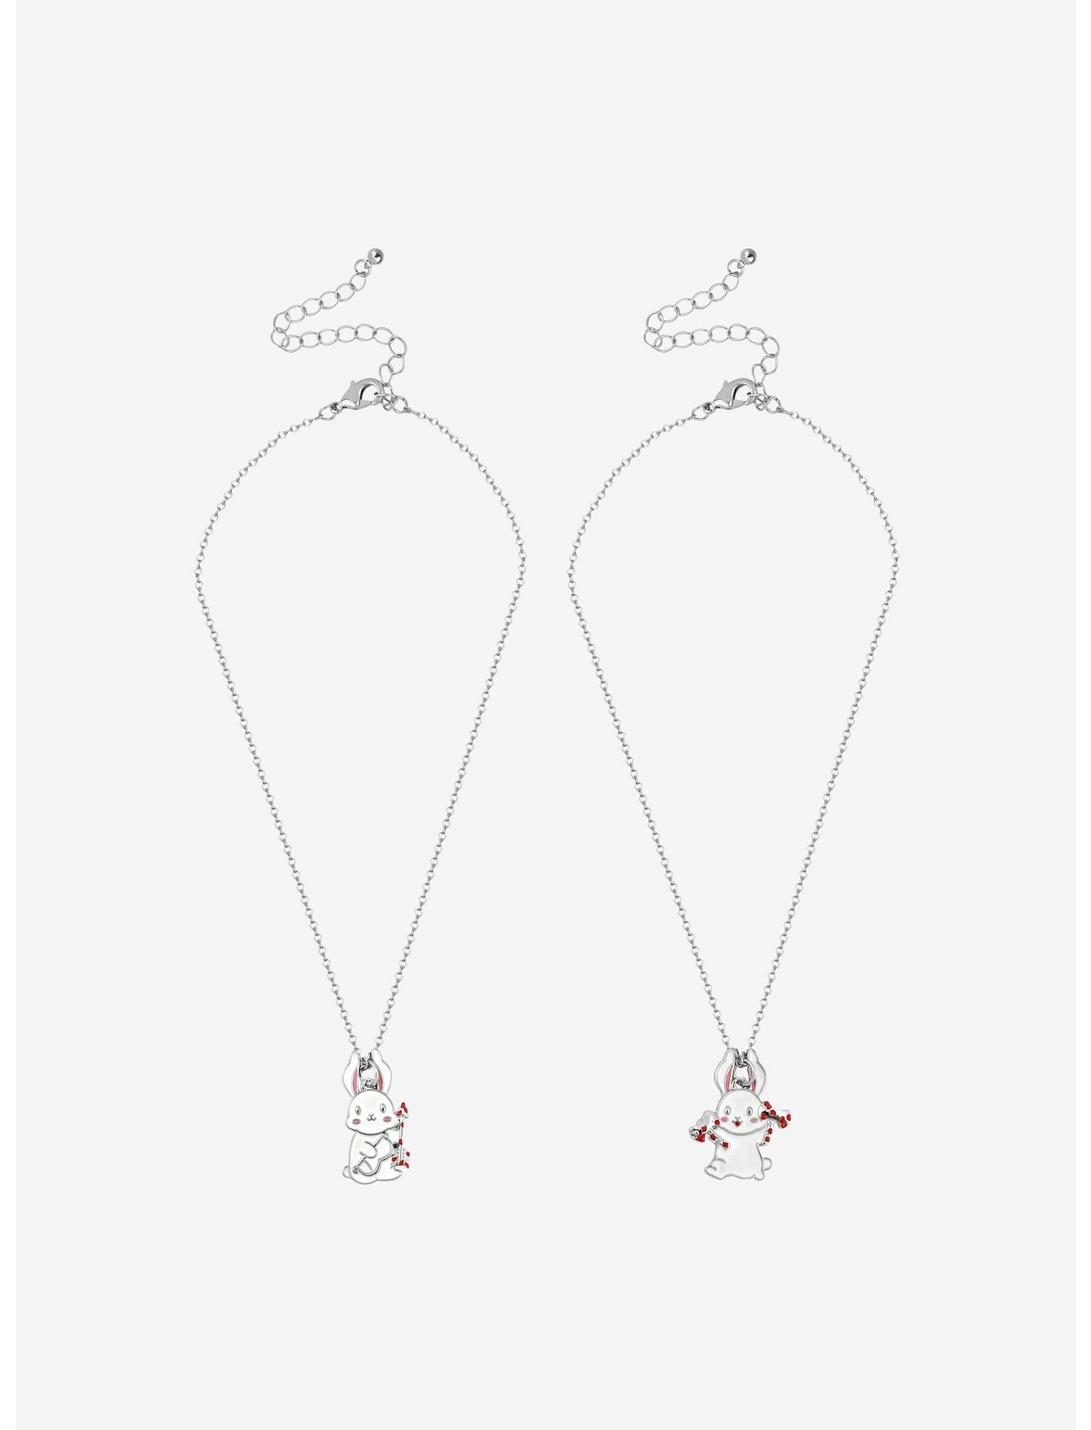 Bunny Bloody Weapons Best Friend Necklace Set, , hi-res